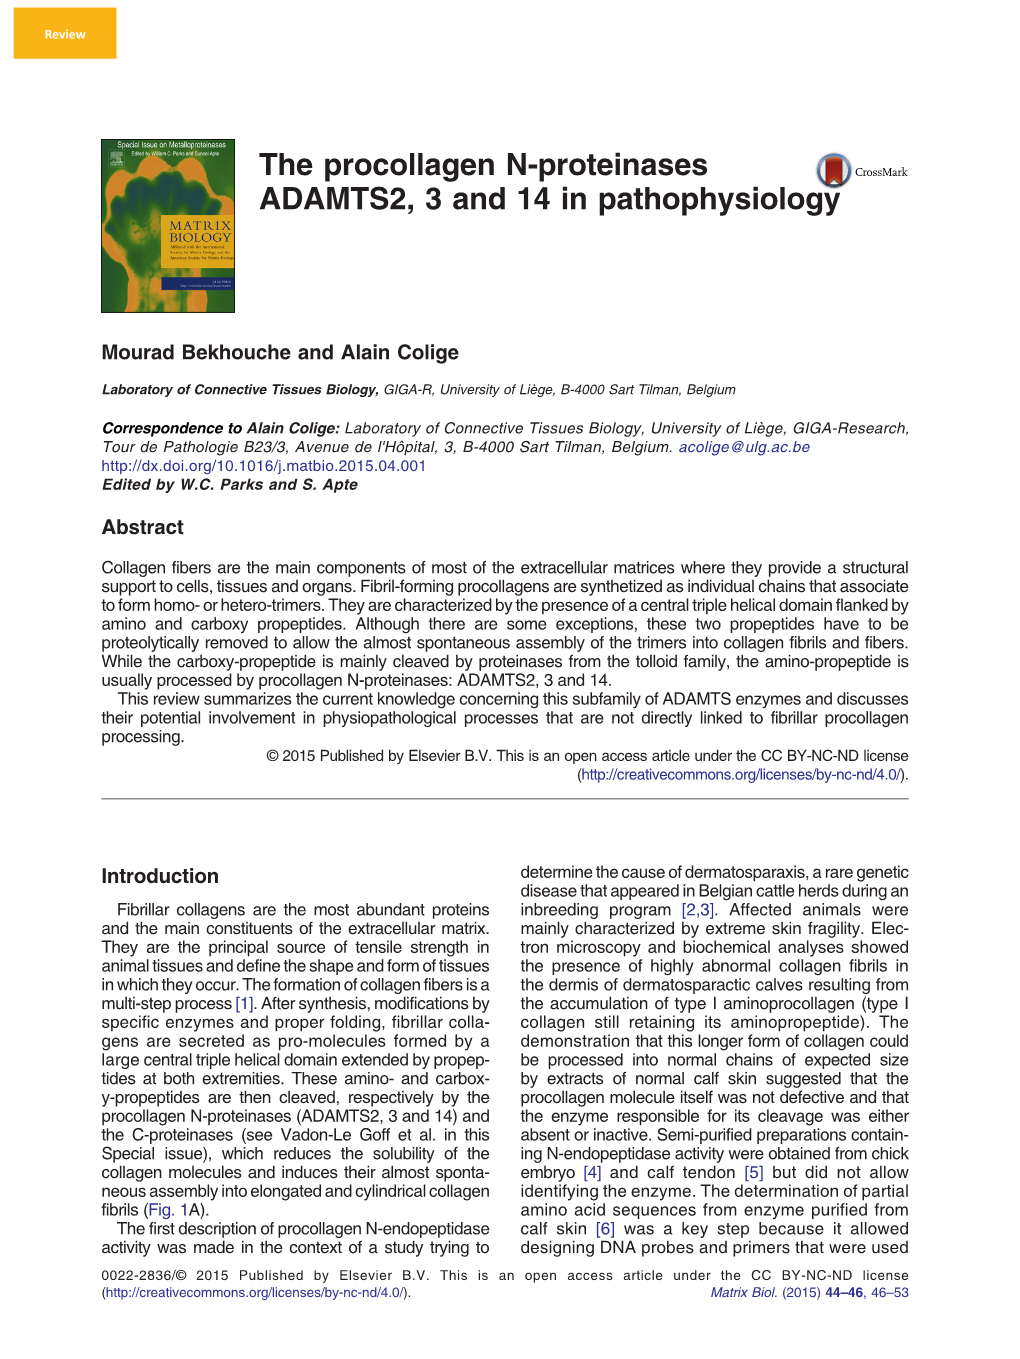 The Procollagen N-Proteinases ADAMTS2, 3 and 14 in Pathophysiology